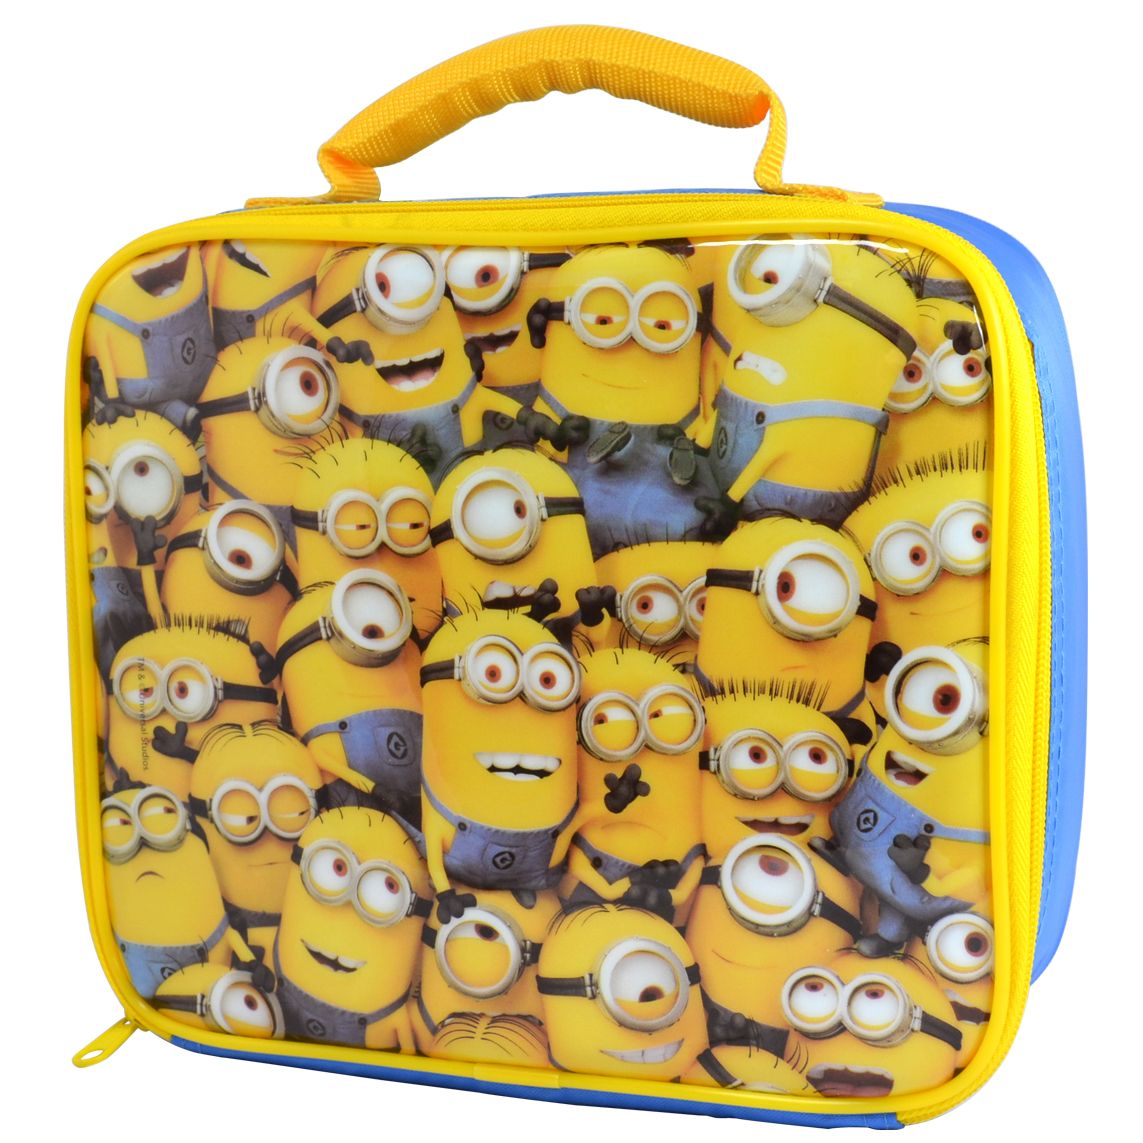 Despicable Me 2 Lunch Bag